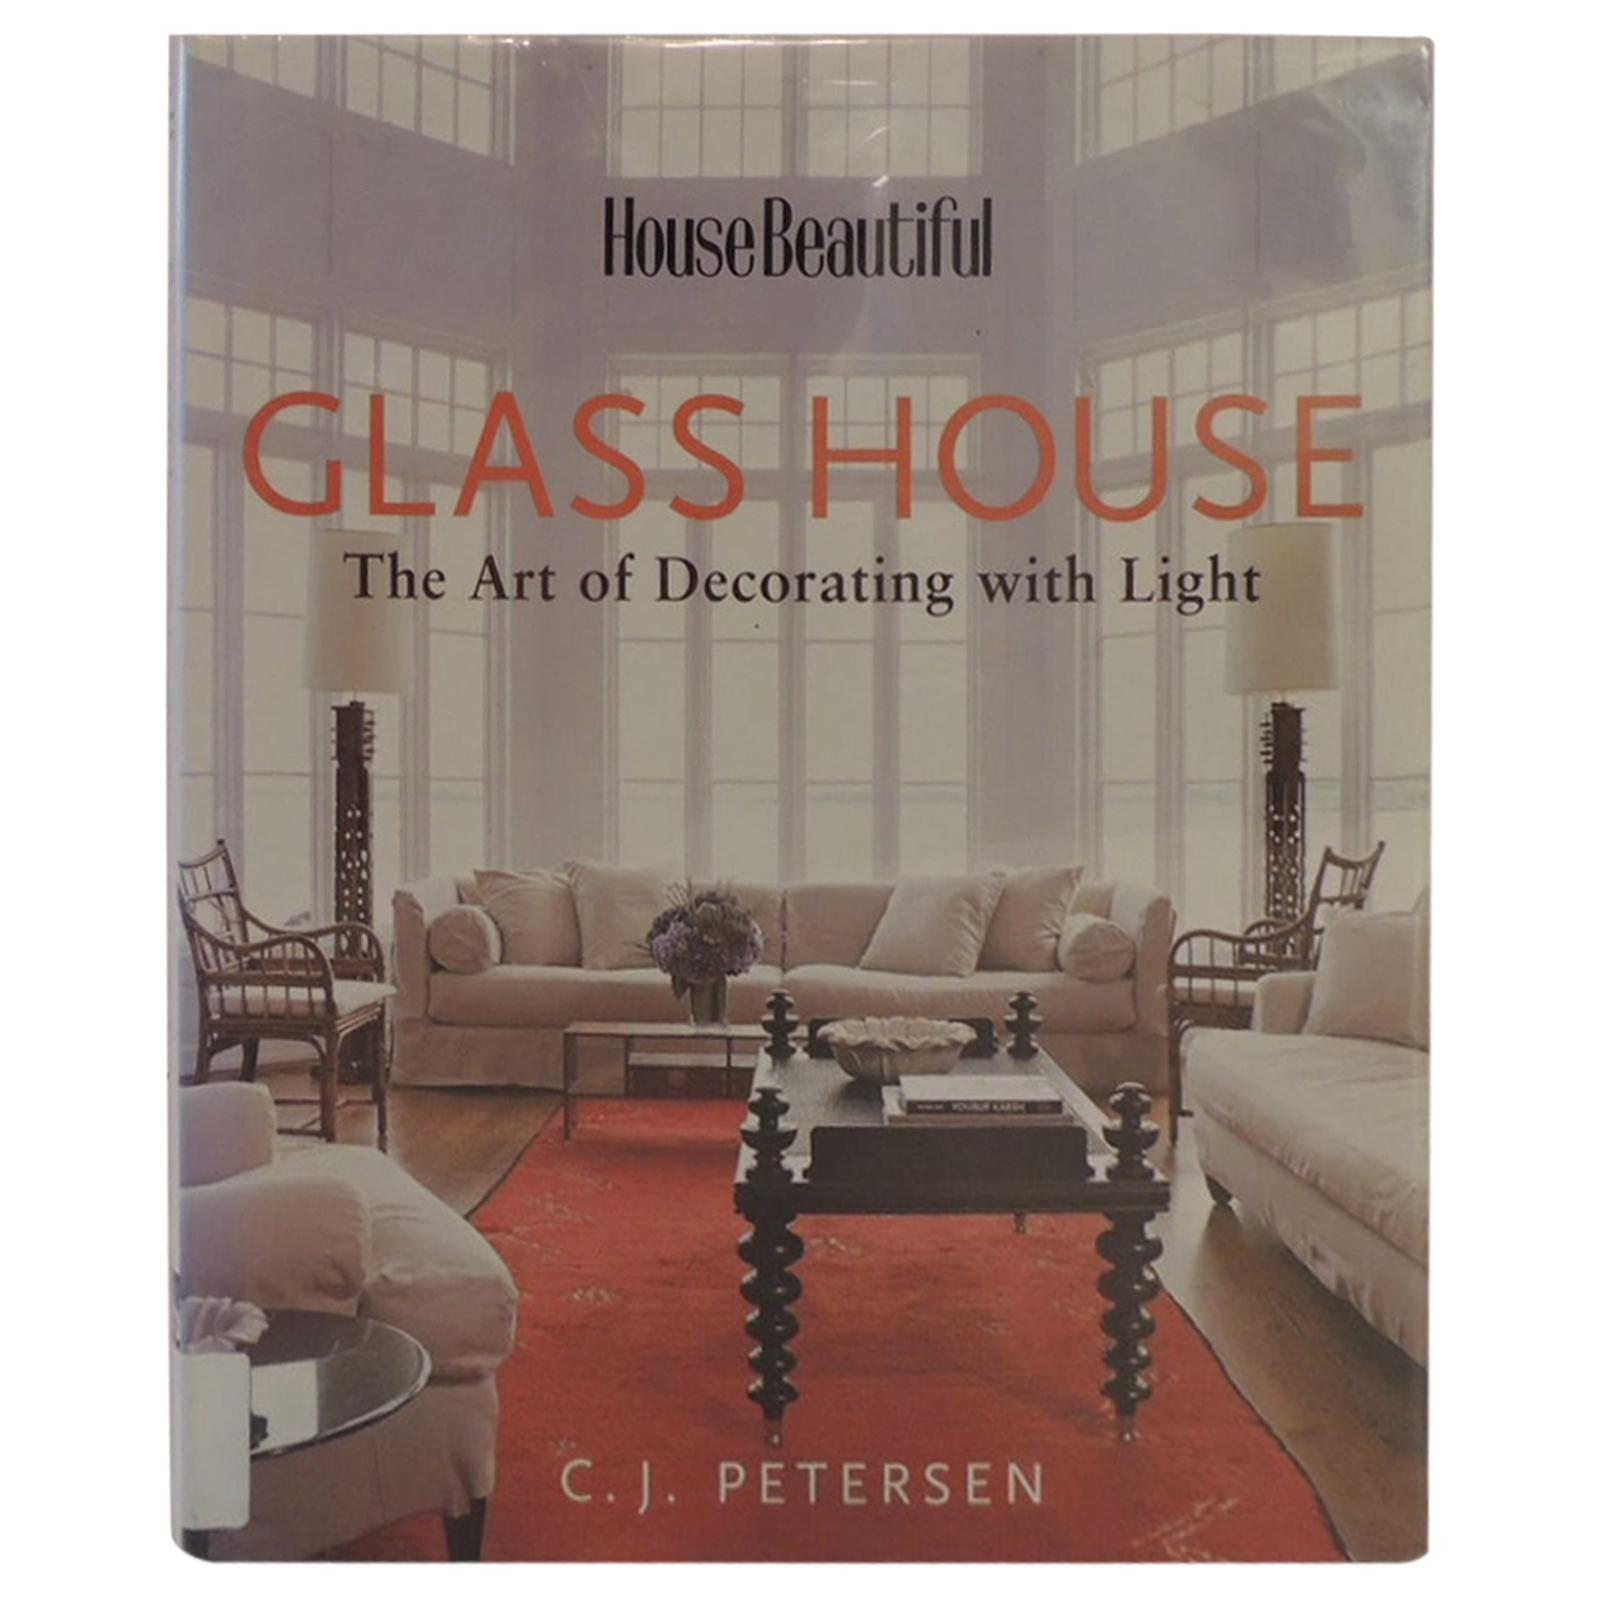 "Glass House" by House Beautiful Decorative Book